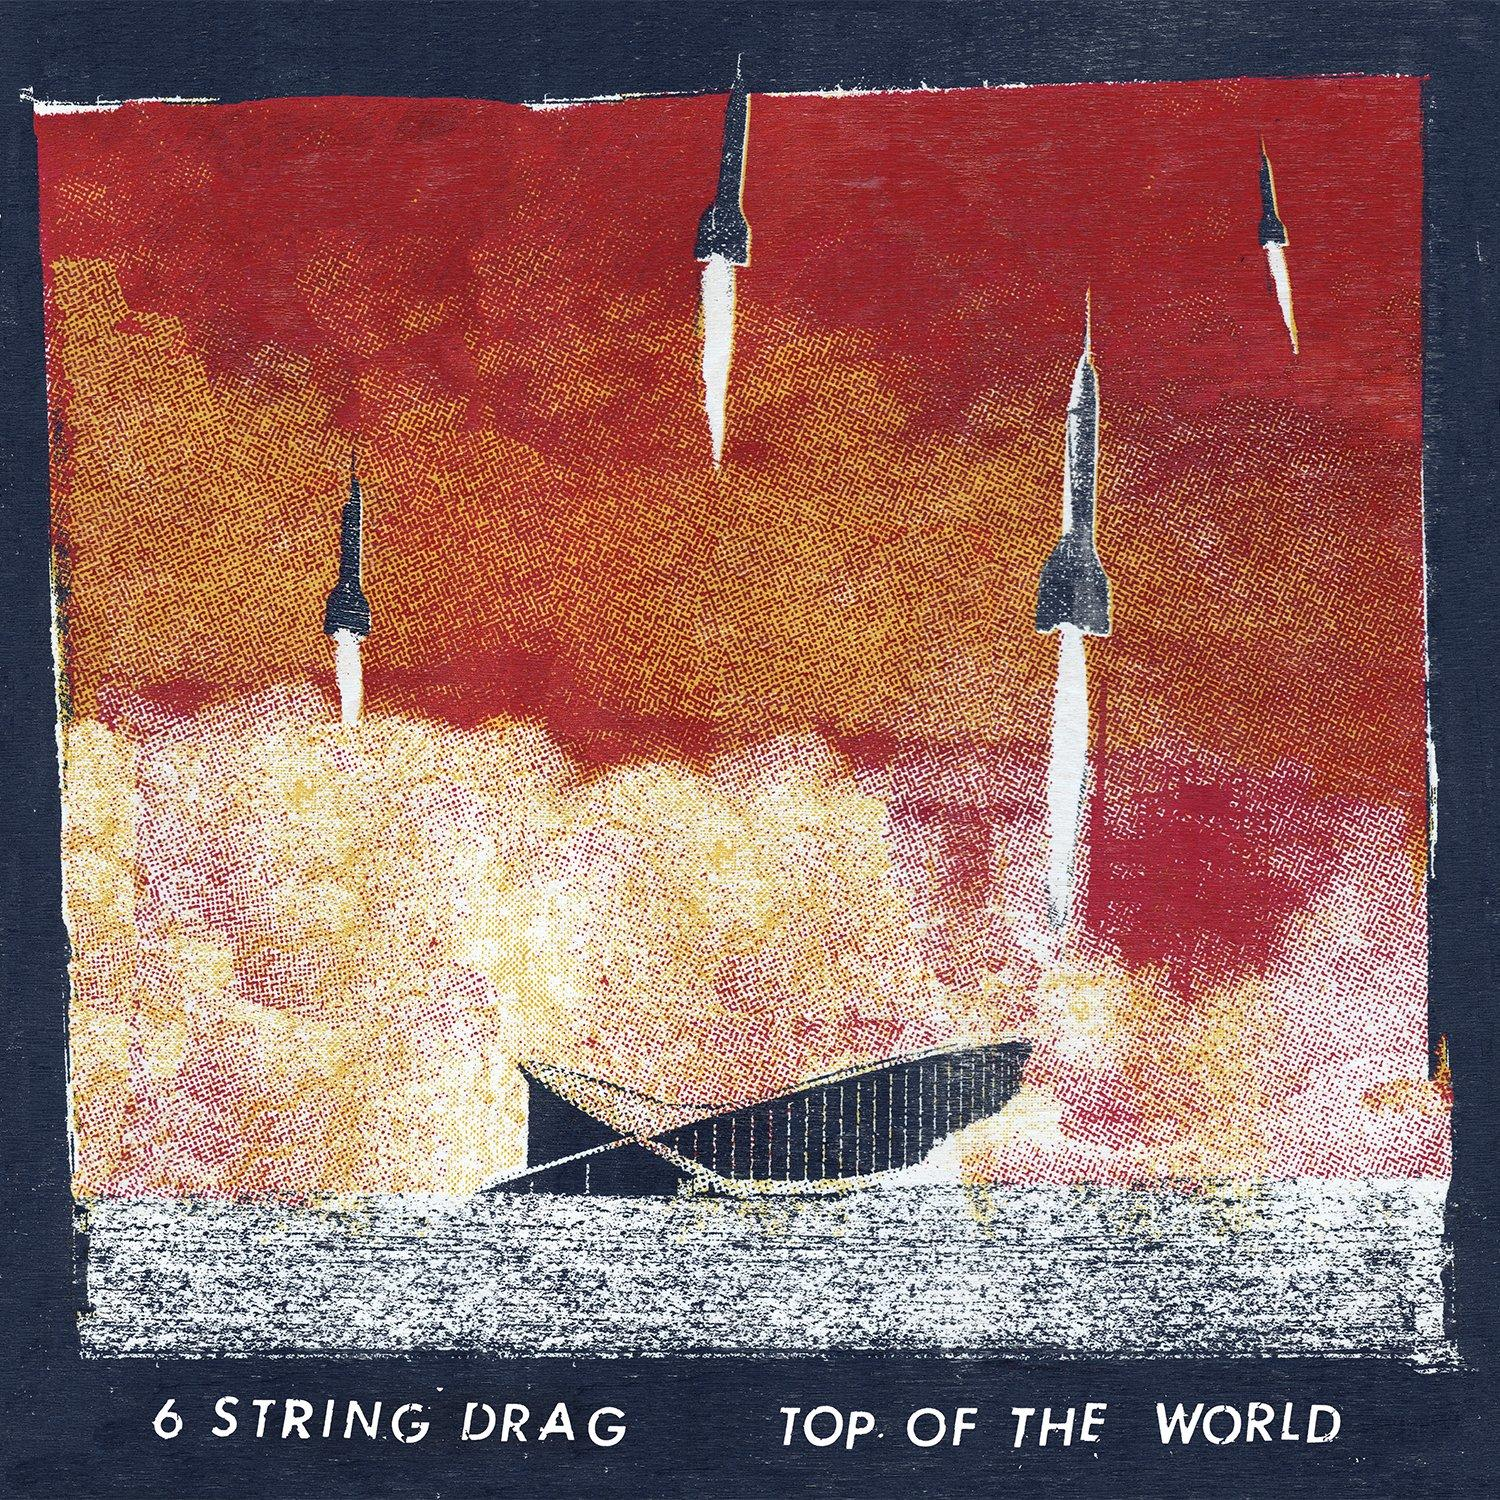 Six String Drag - Of Top The (CD) World 